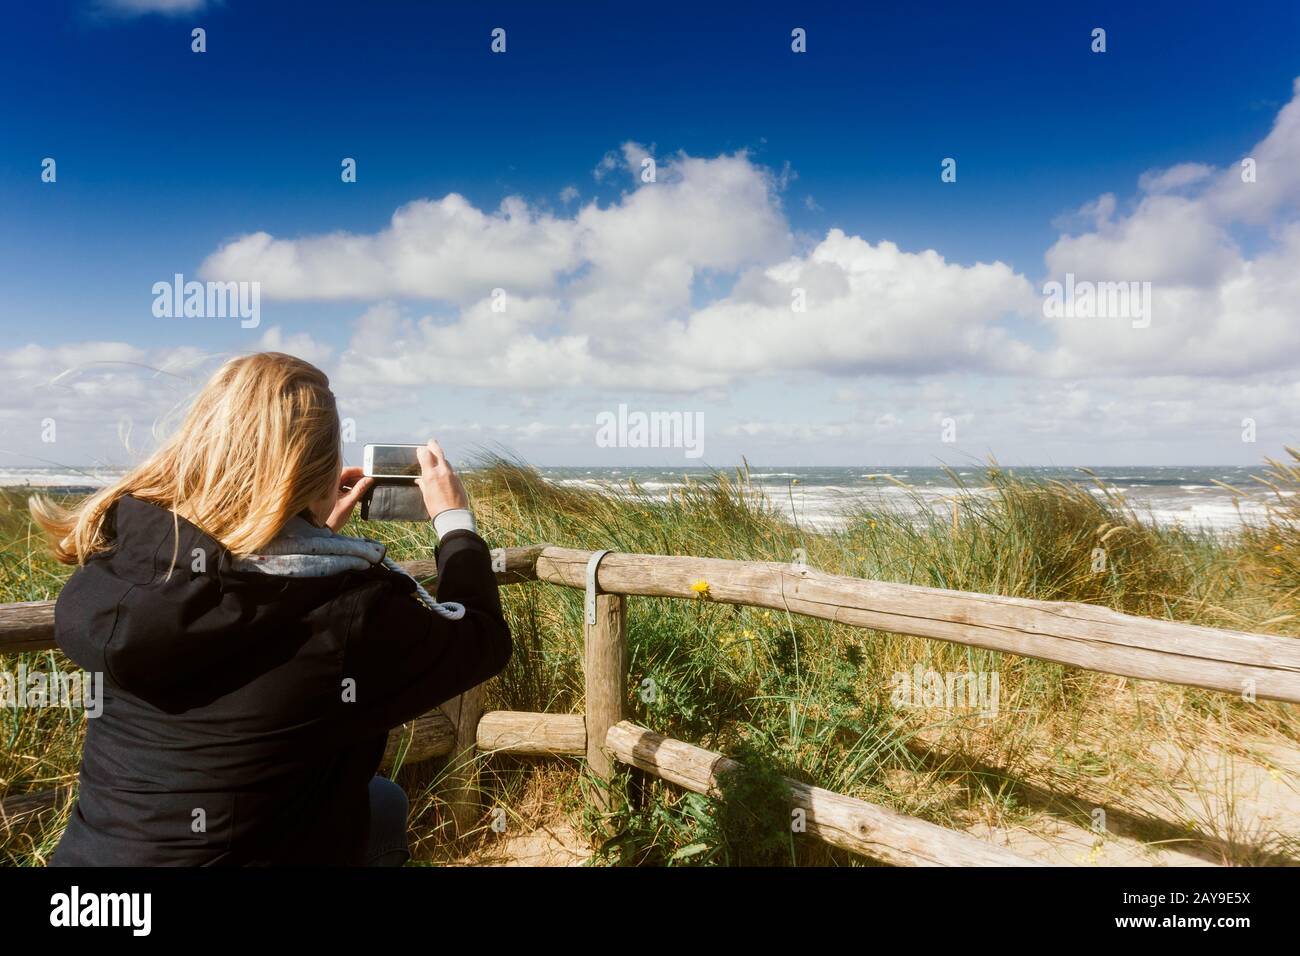 Woman is taking a snapshot of the beach the sea and the dunes Stock Photo